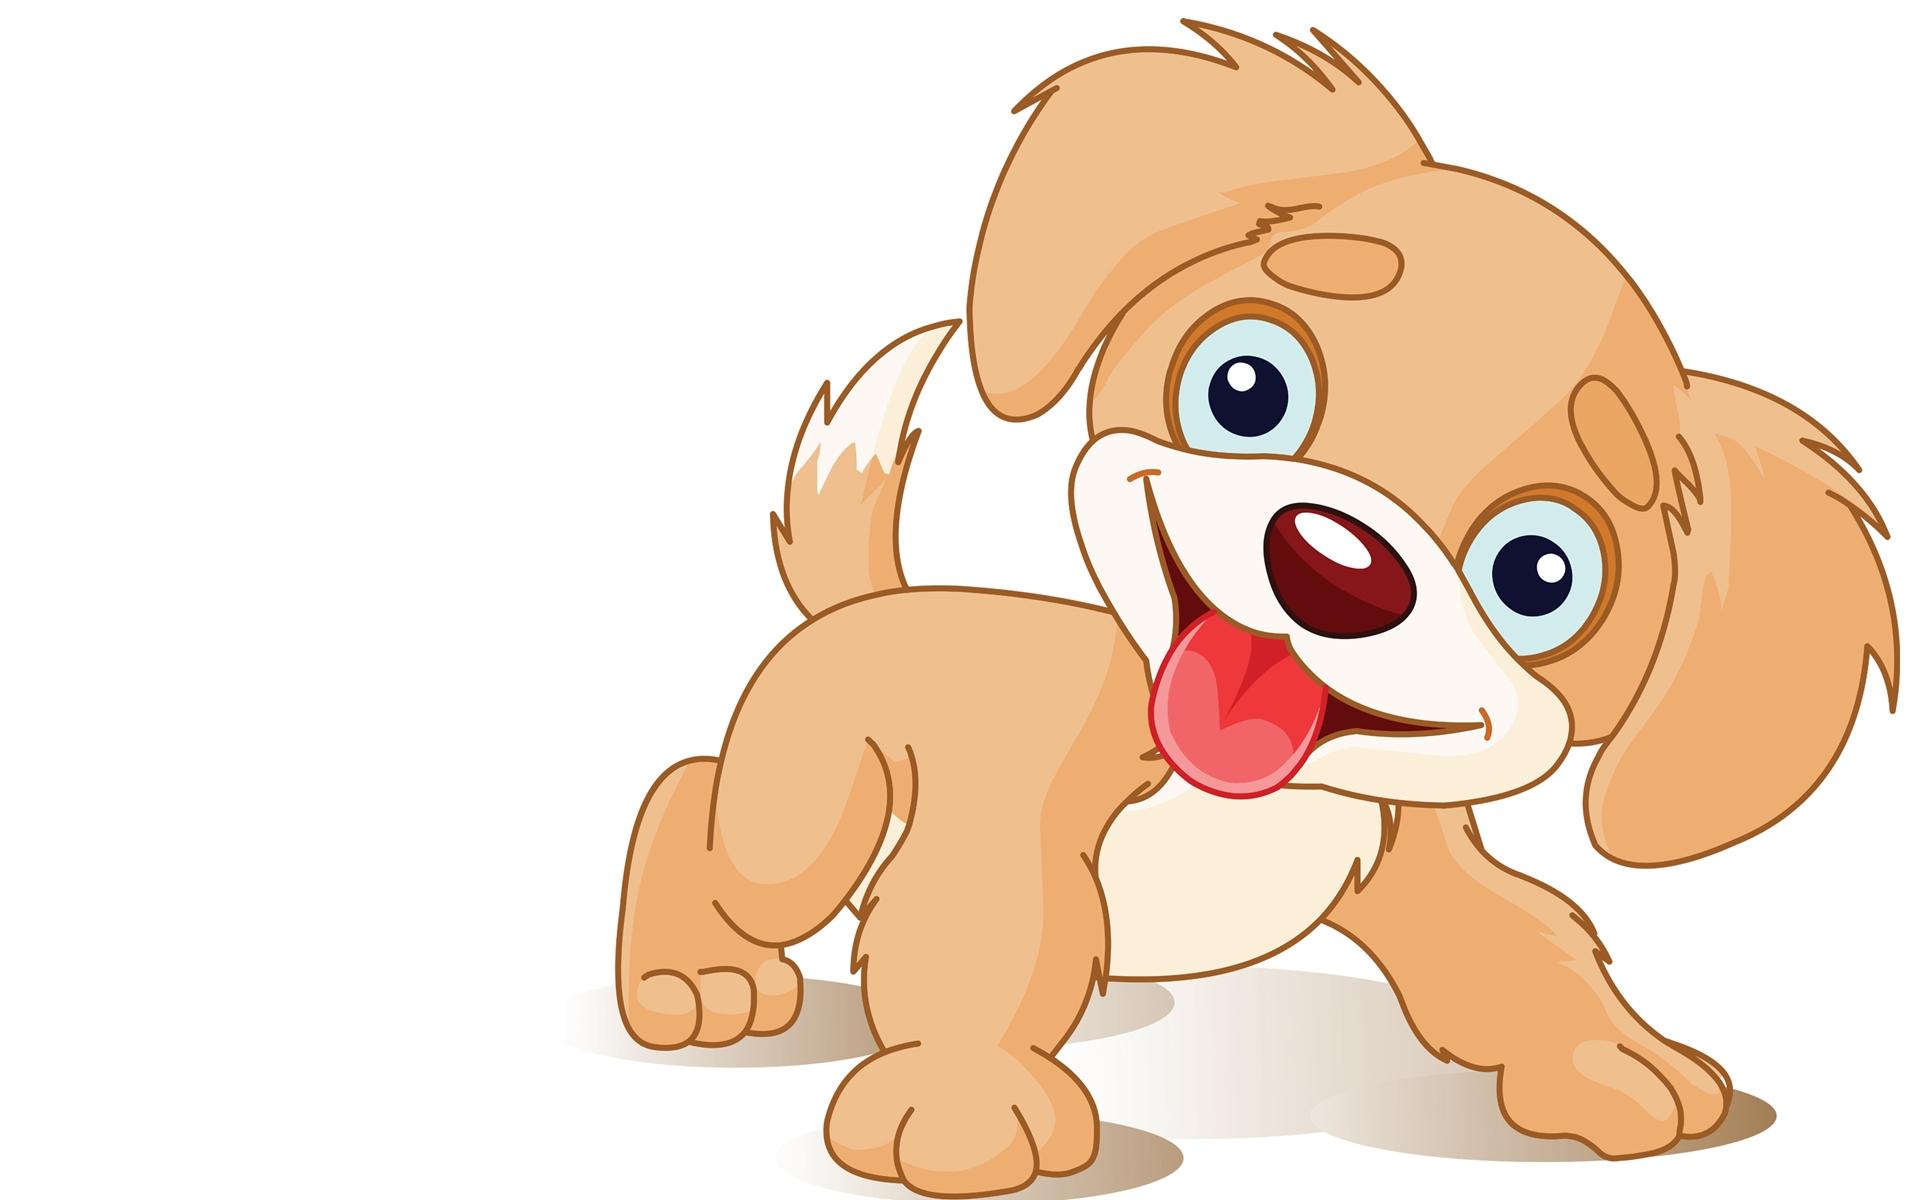 Download Cartoon Dog Wallpapers, HD Backgrounds Download - itl.cat